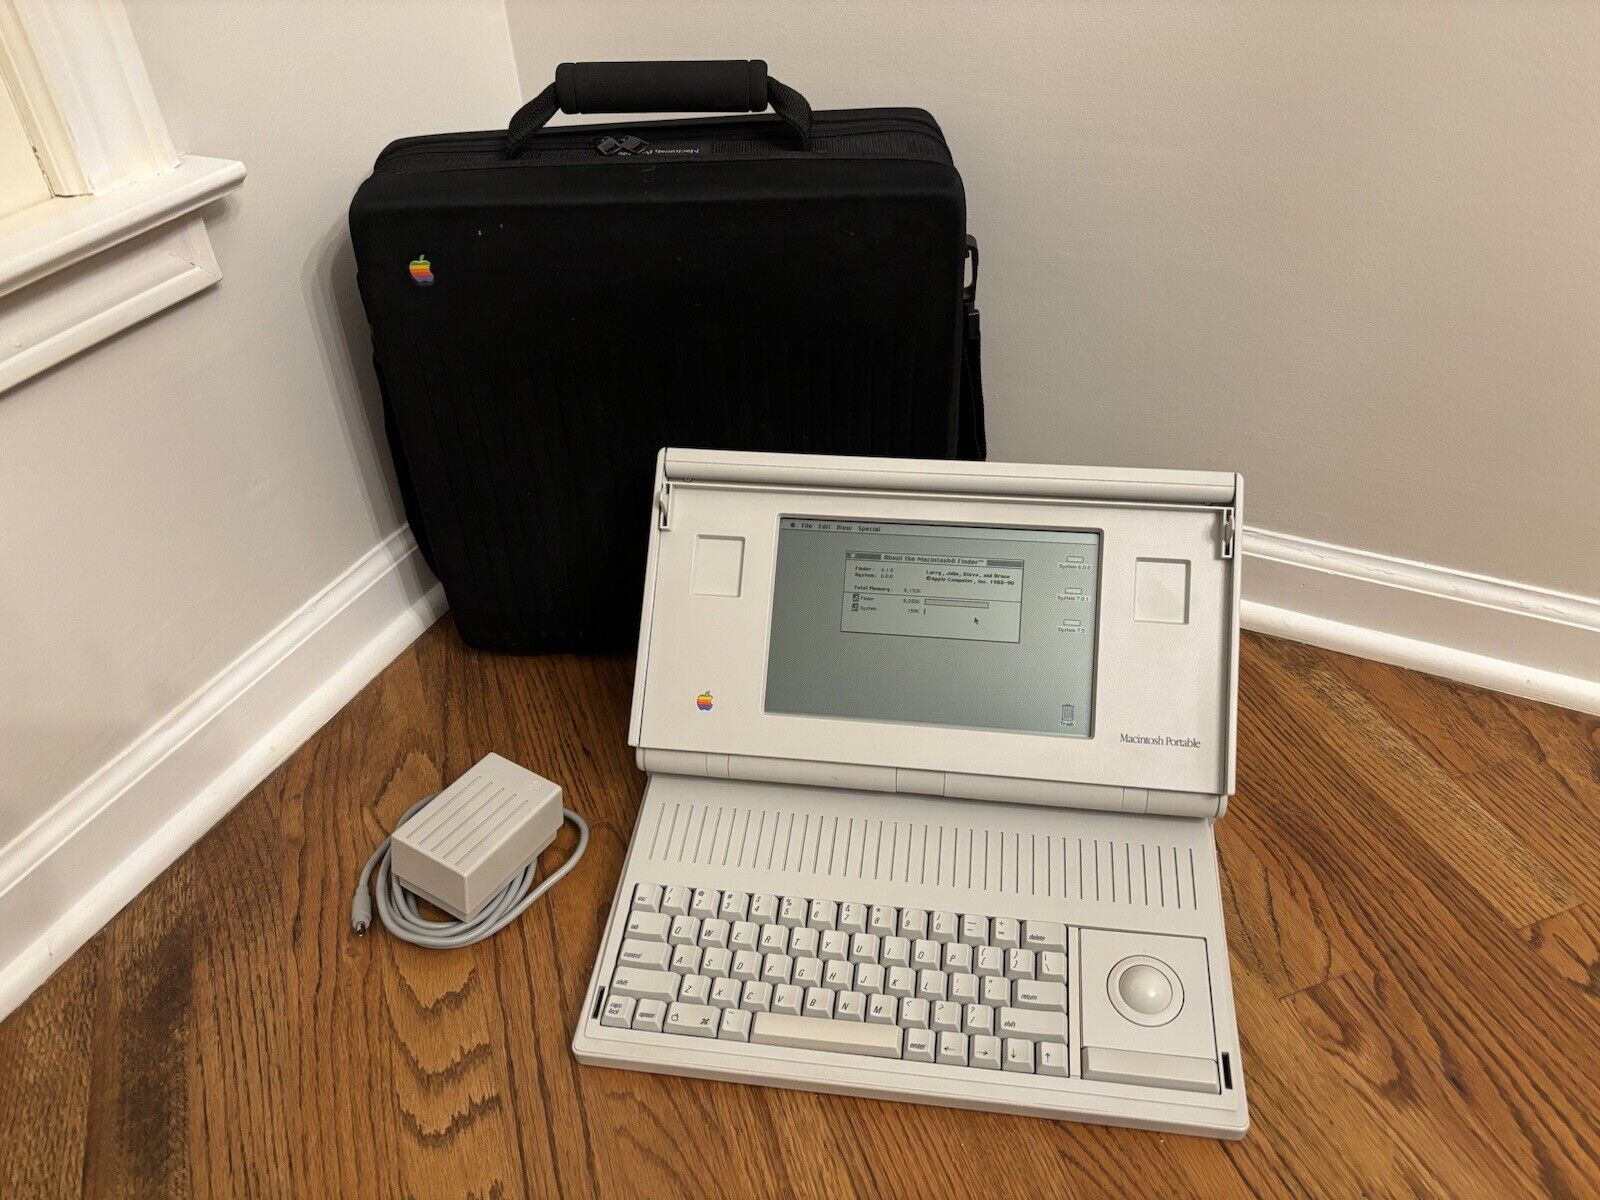 Apple Macintosh Portable 8MB - Recapped & Restored, SCSI SD, New Battery, Wi-Fi